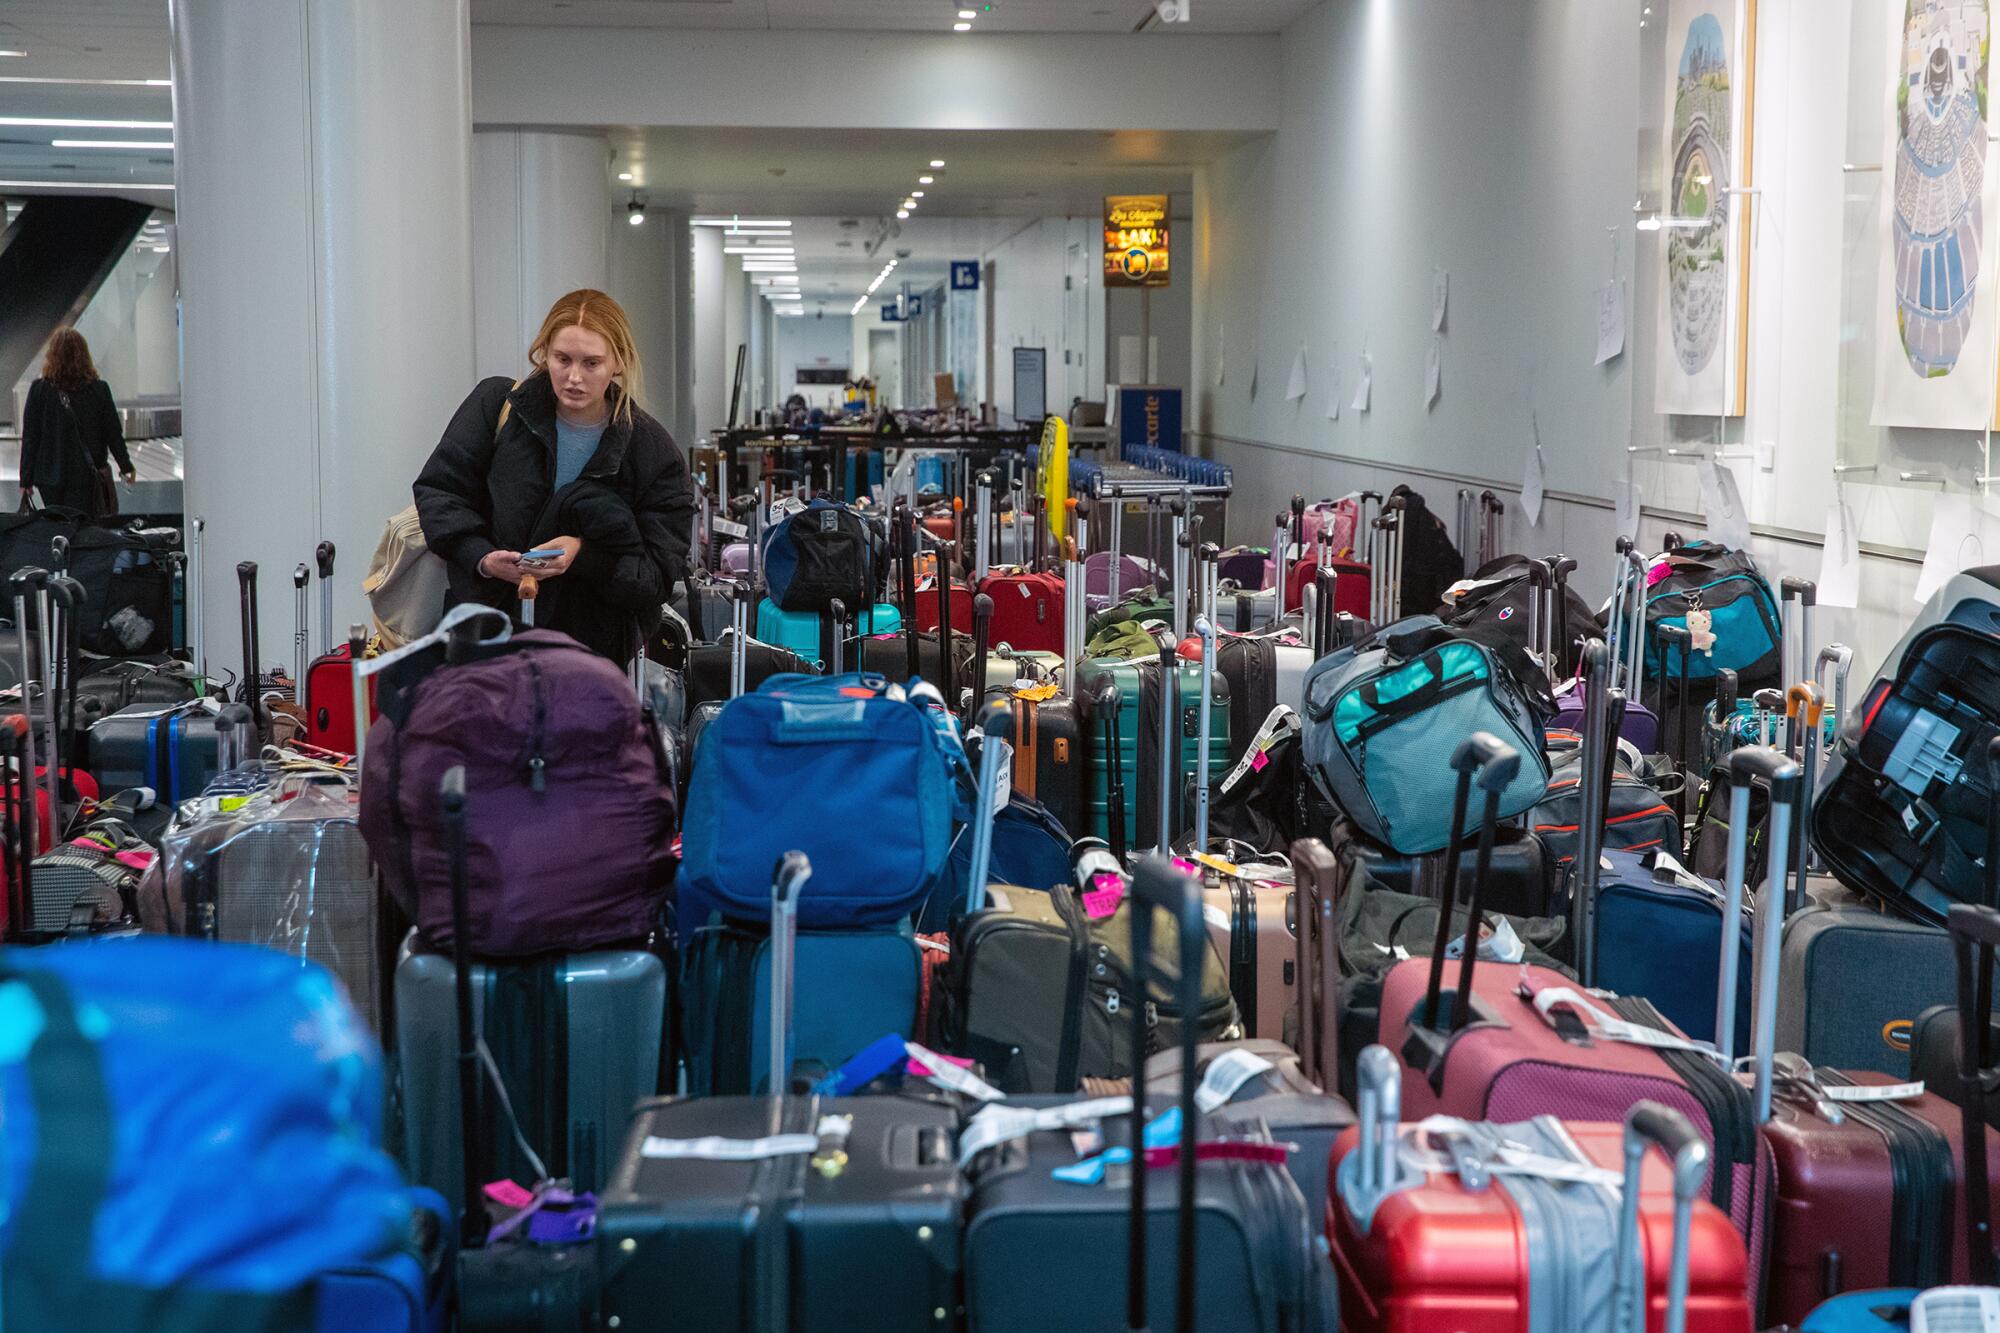 A woman seeks out her luggage among dozens of bags at LAX.